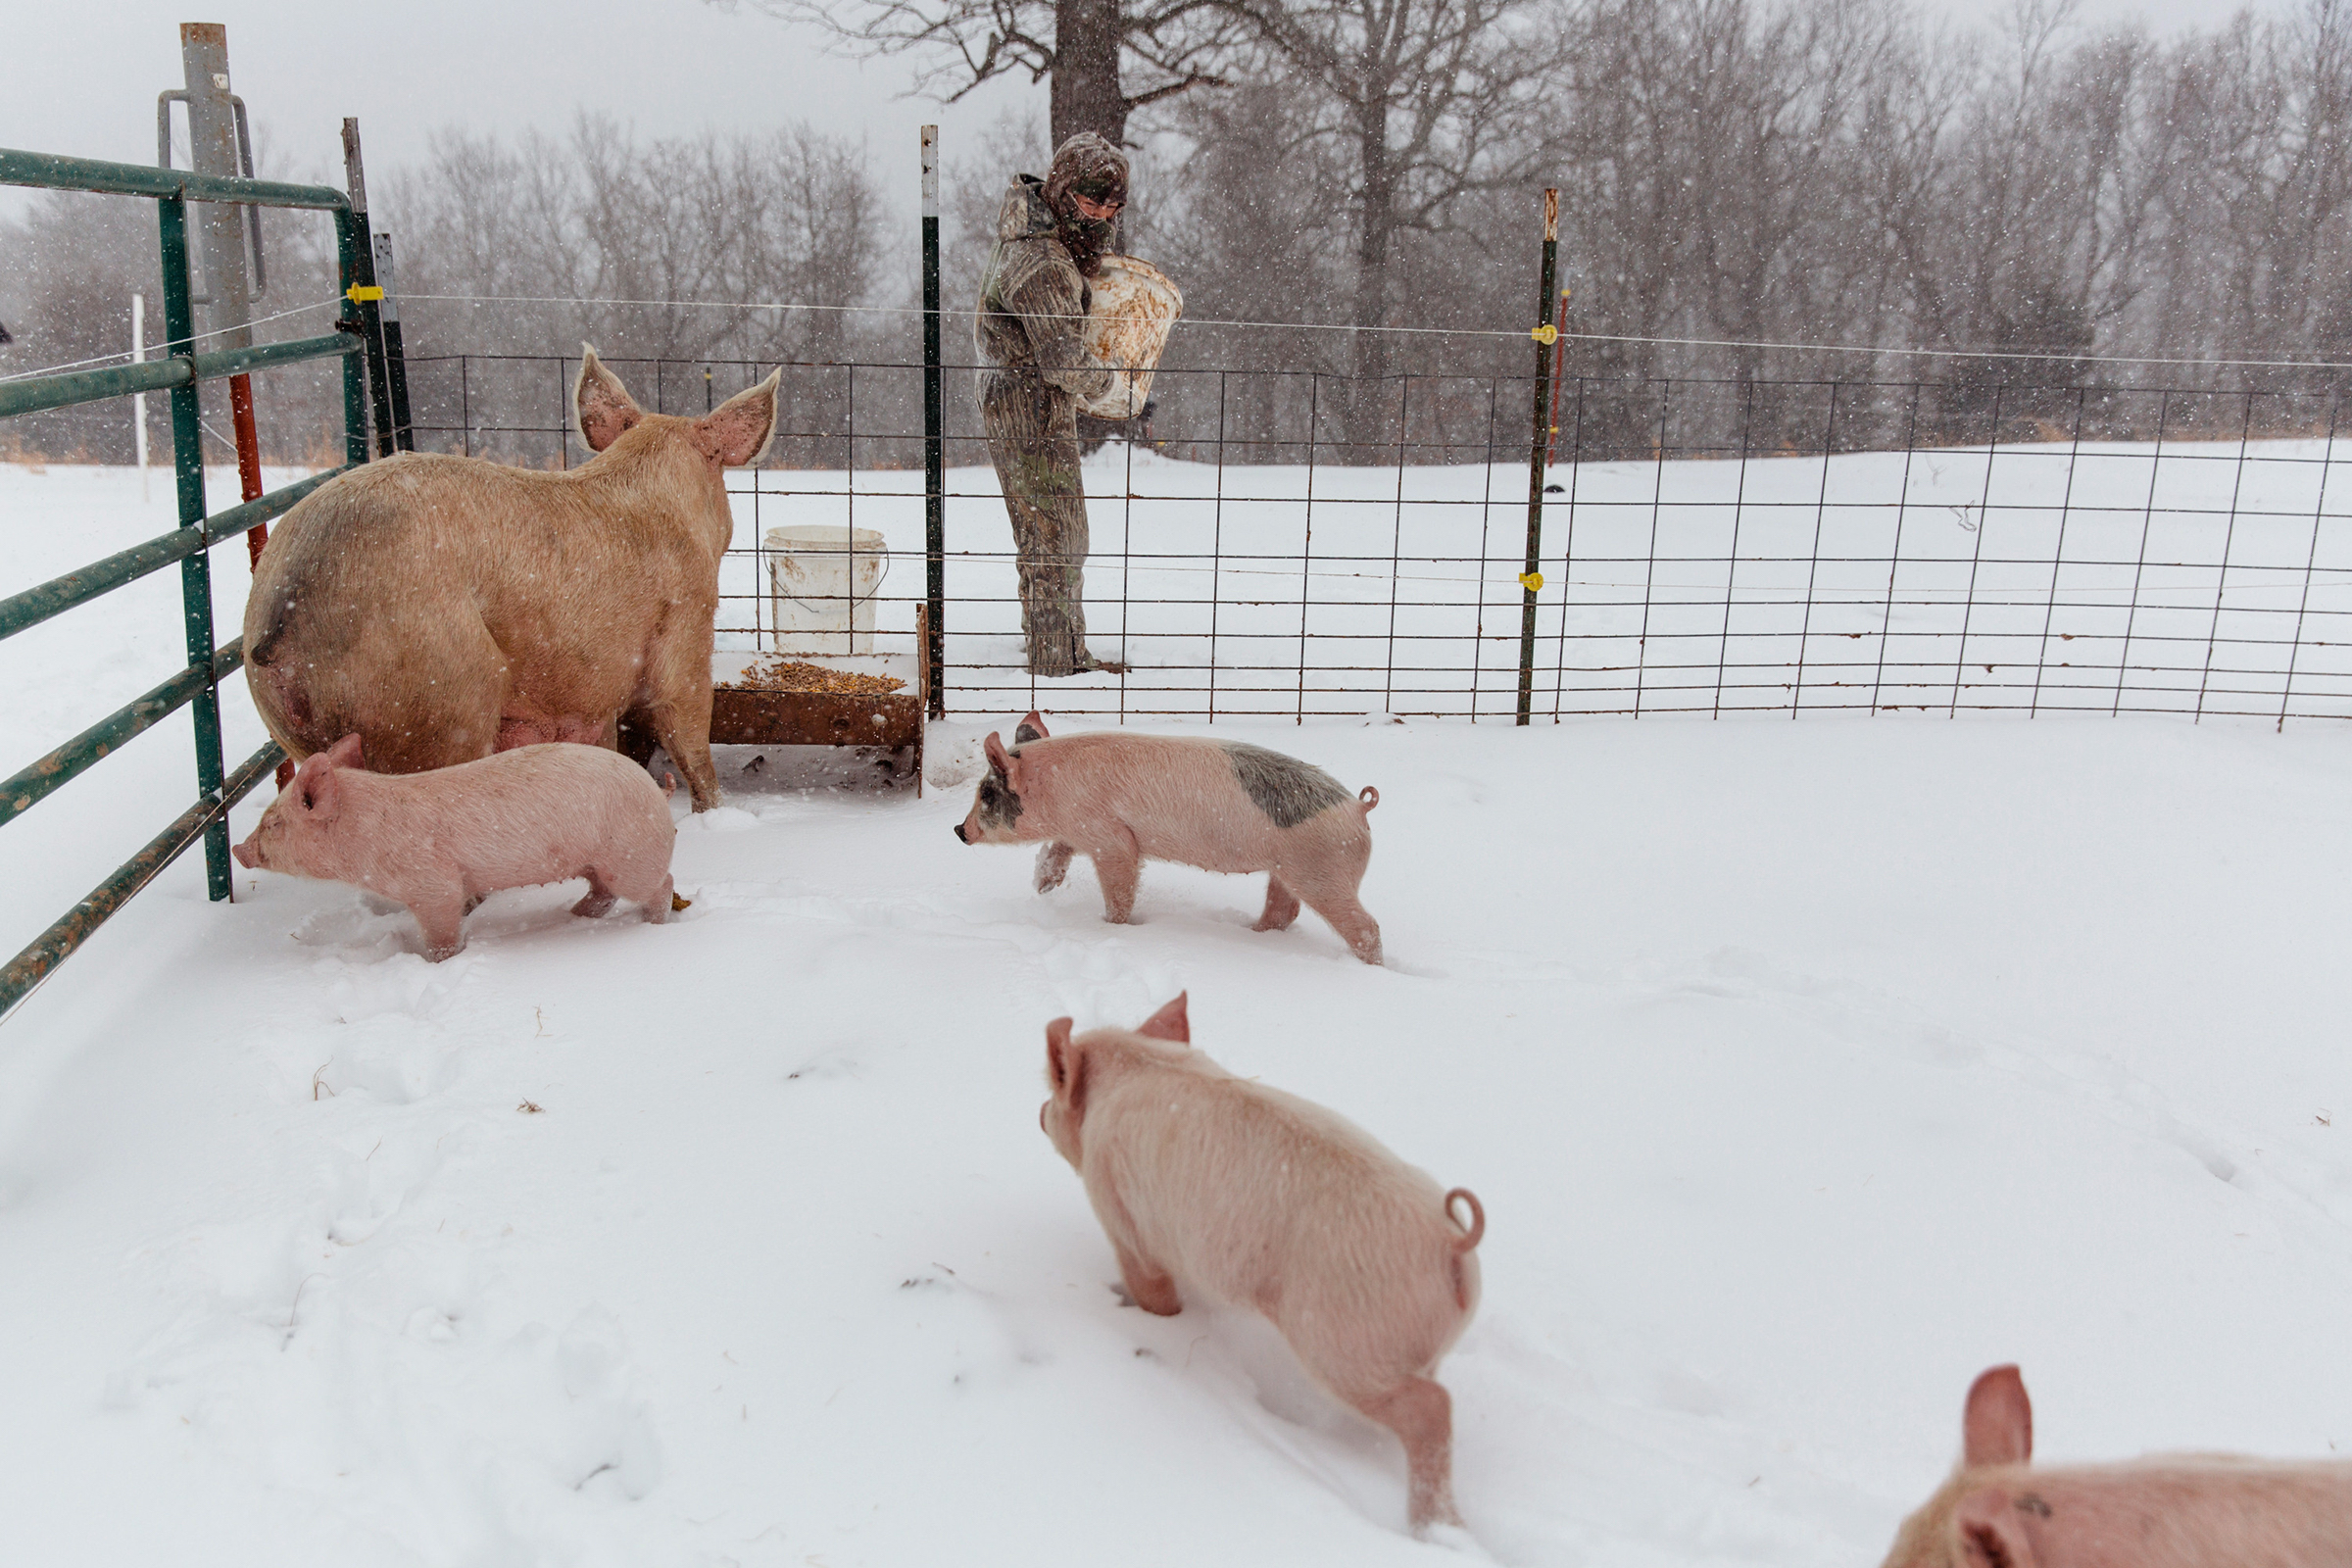 A boy feeds his pigs in St. Joe, Ark., on Feb. 15. An unusually wide band of frigid air over the center of the country spread dangerous ice and snow in many areas that rarely see such weather.